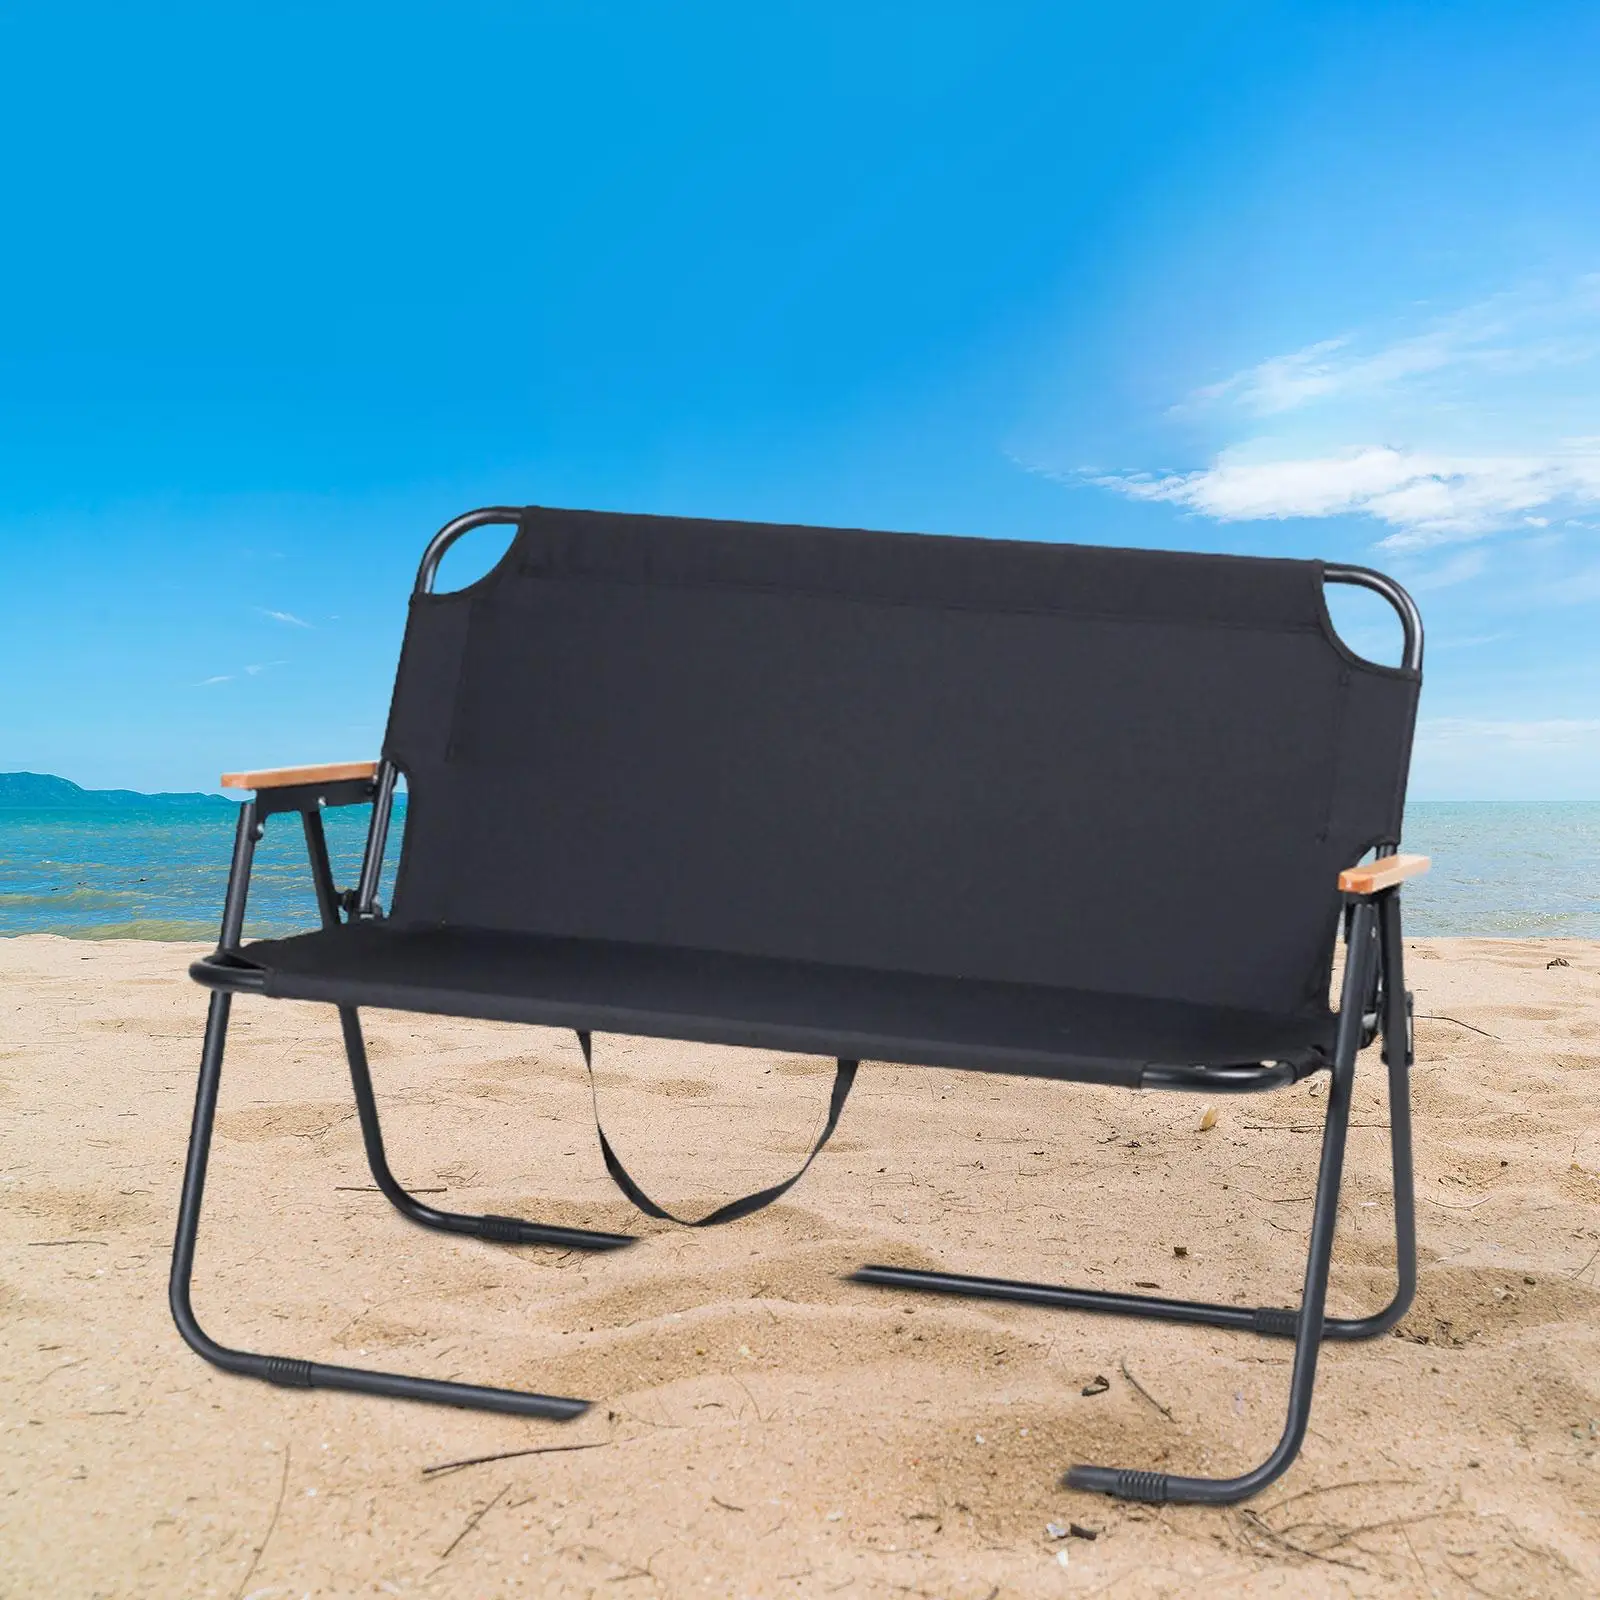 Folding Camping Chair Lightweight Camping Seat Double Chair Outdoor Travel Fishing Camping Stool Chair Camp Chair Beach Chair